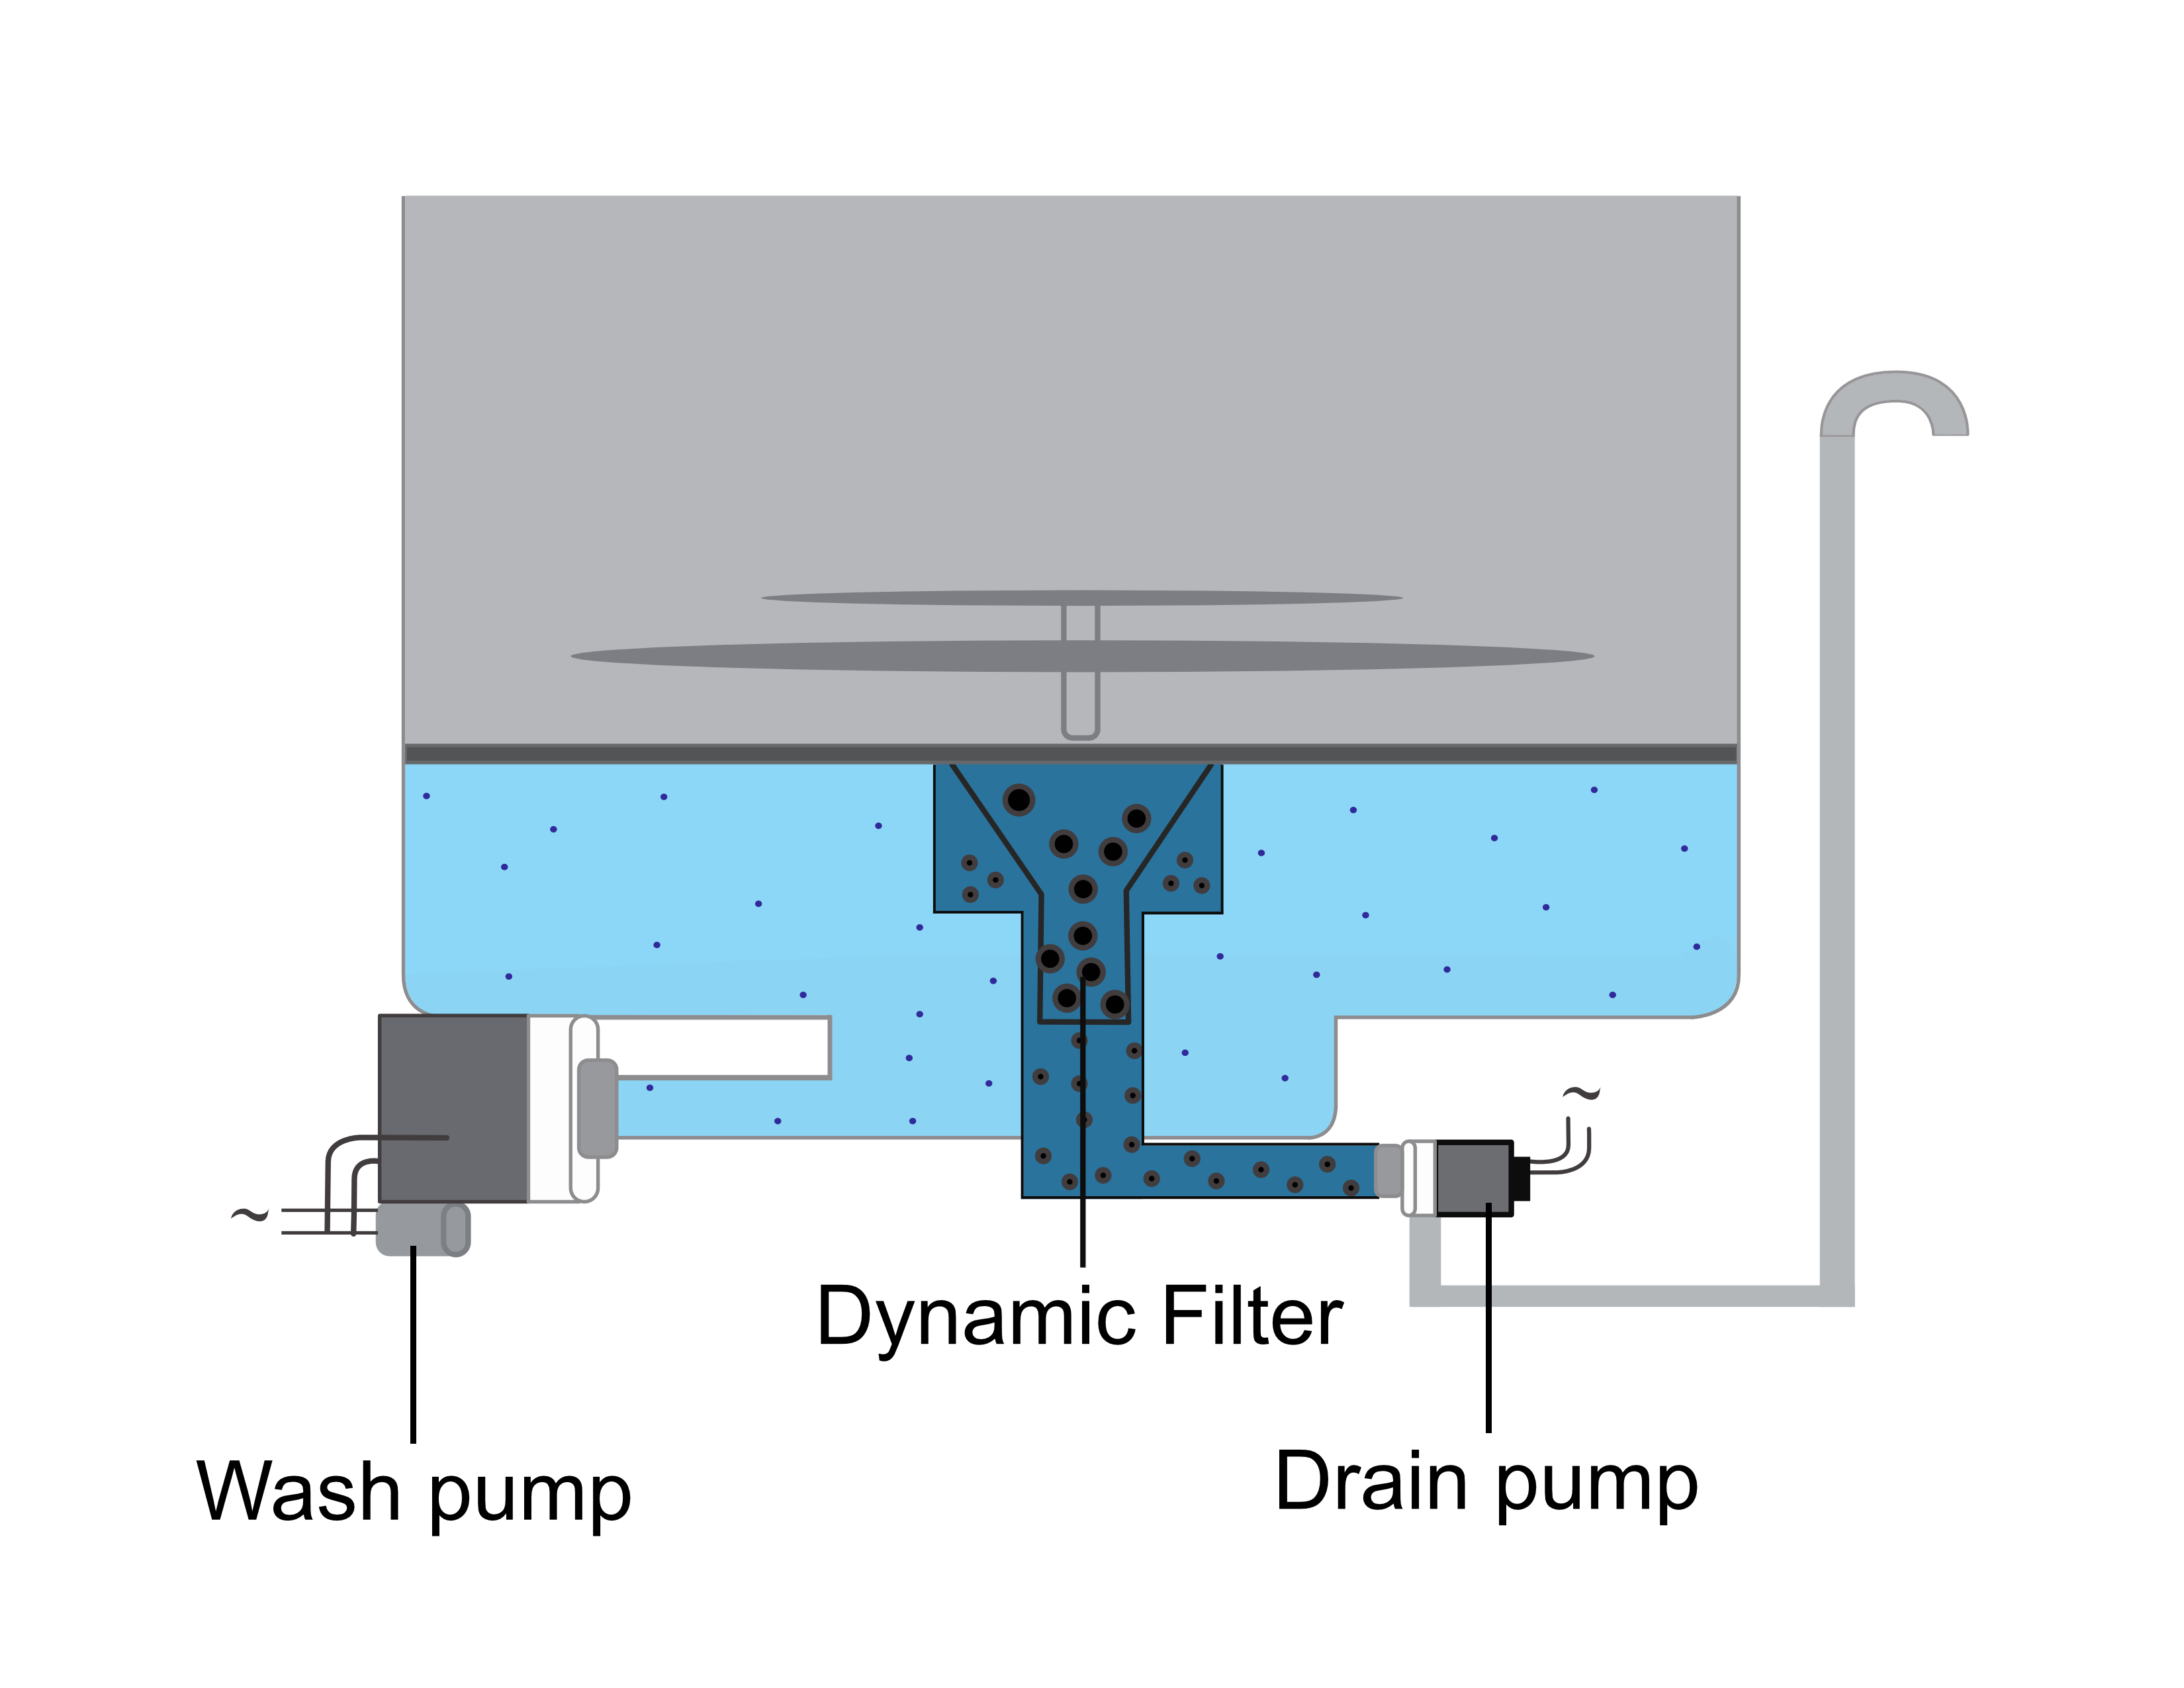 A graphic showing the filtration and drainage system in Advantage commercial dishwashers and glasswashers